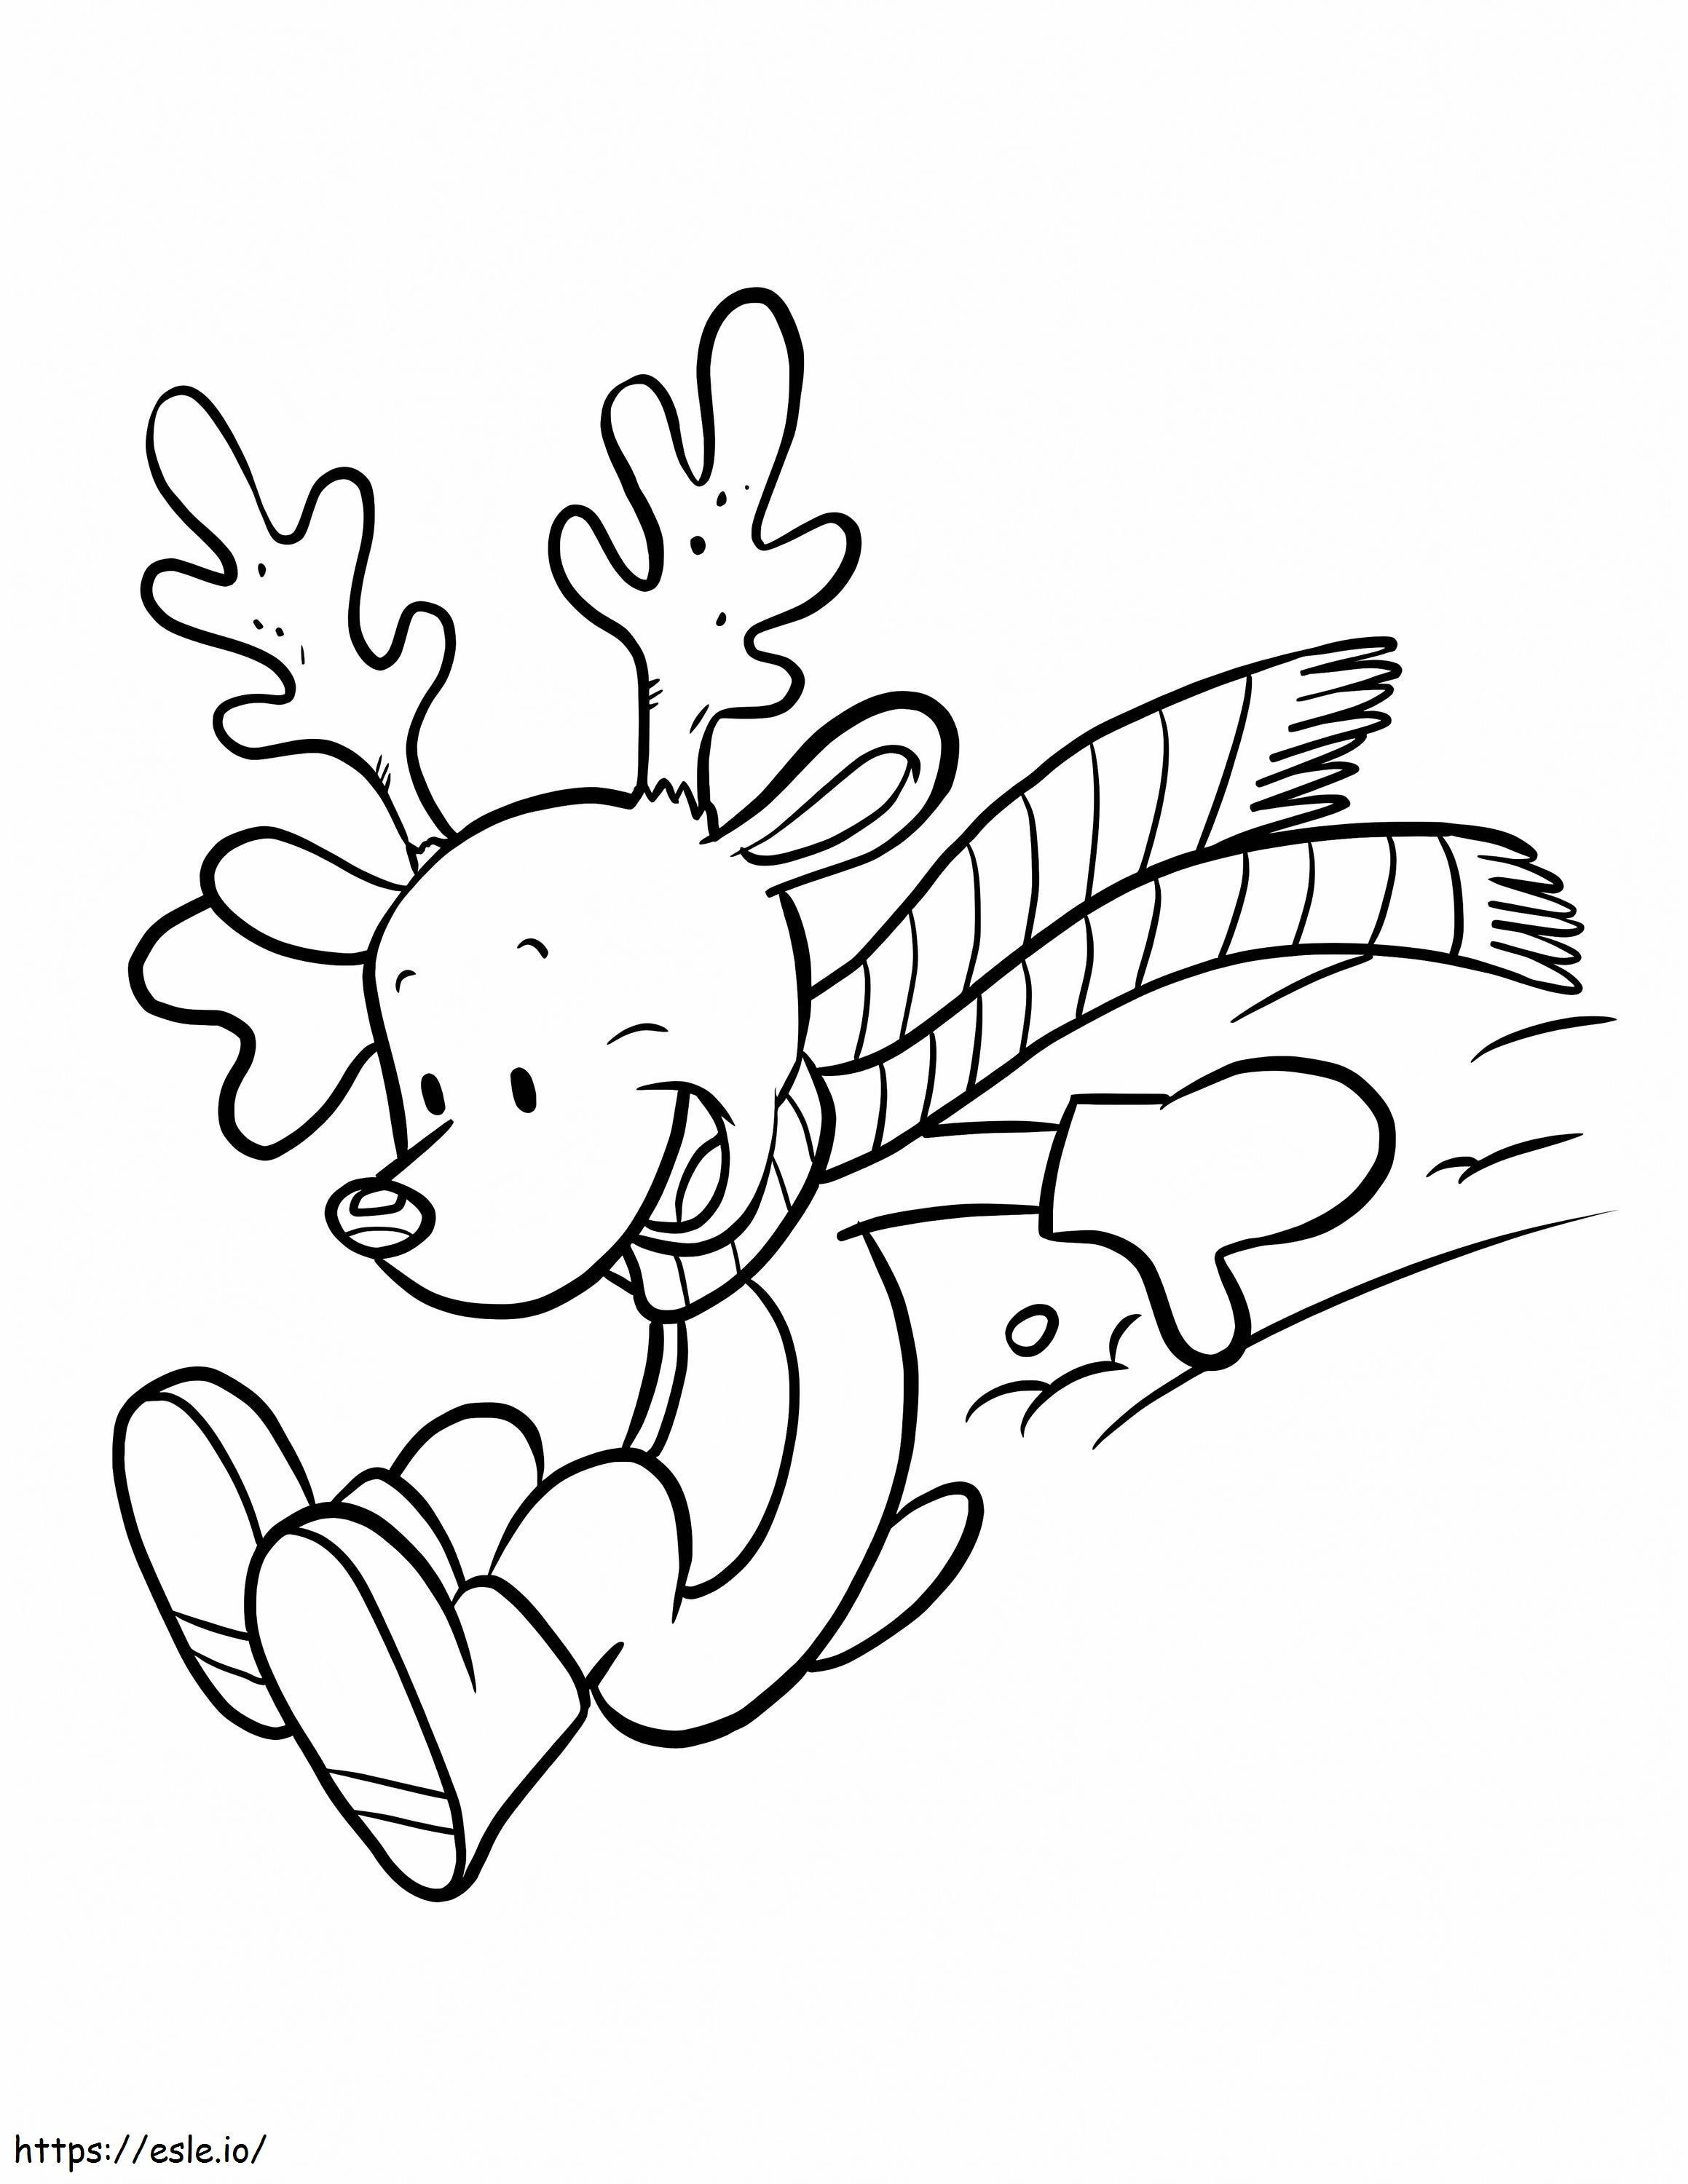 Funny Reindeer coloring page